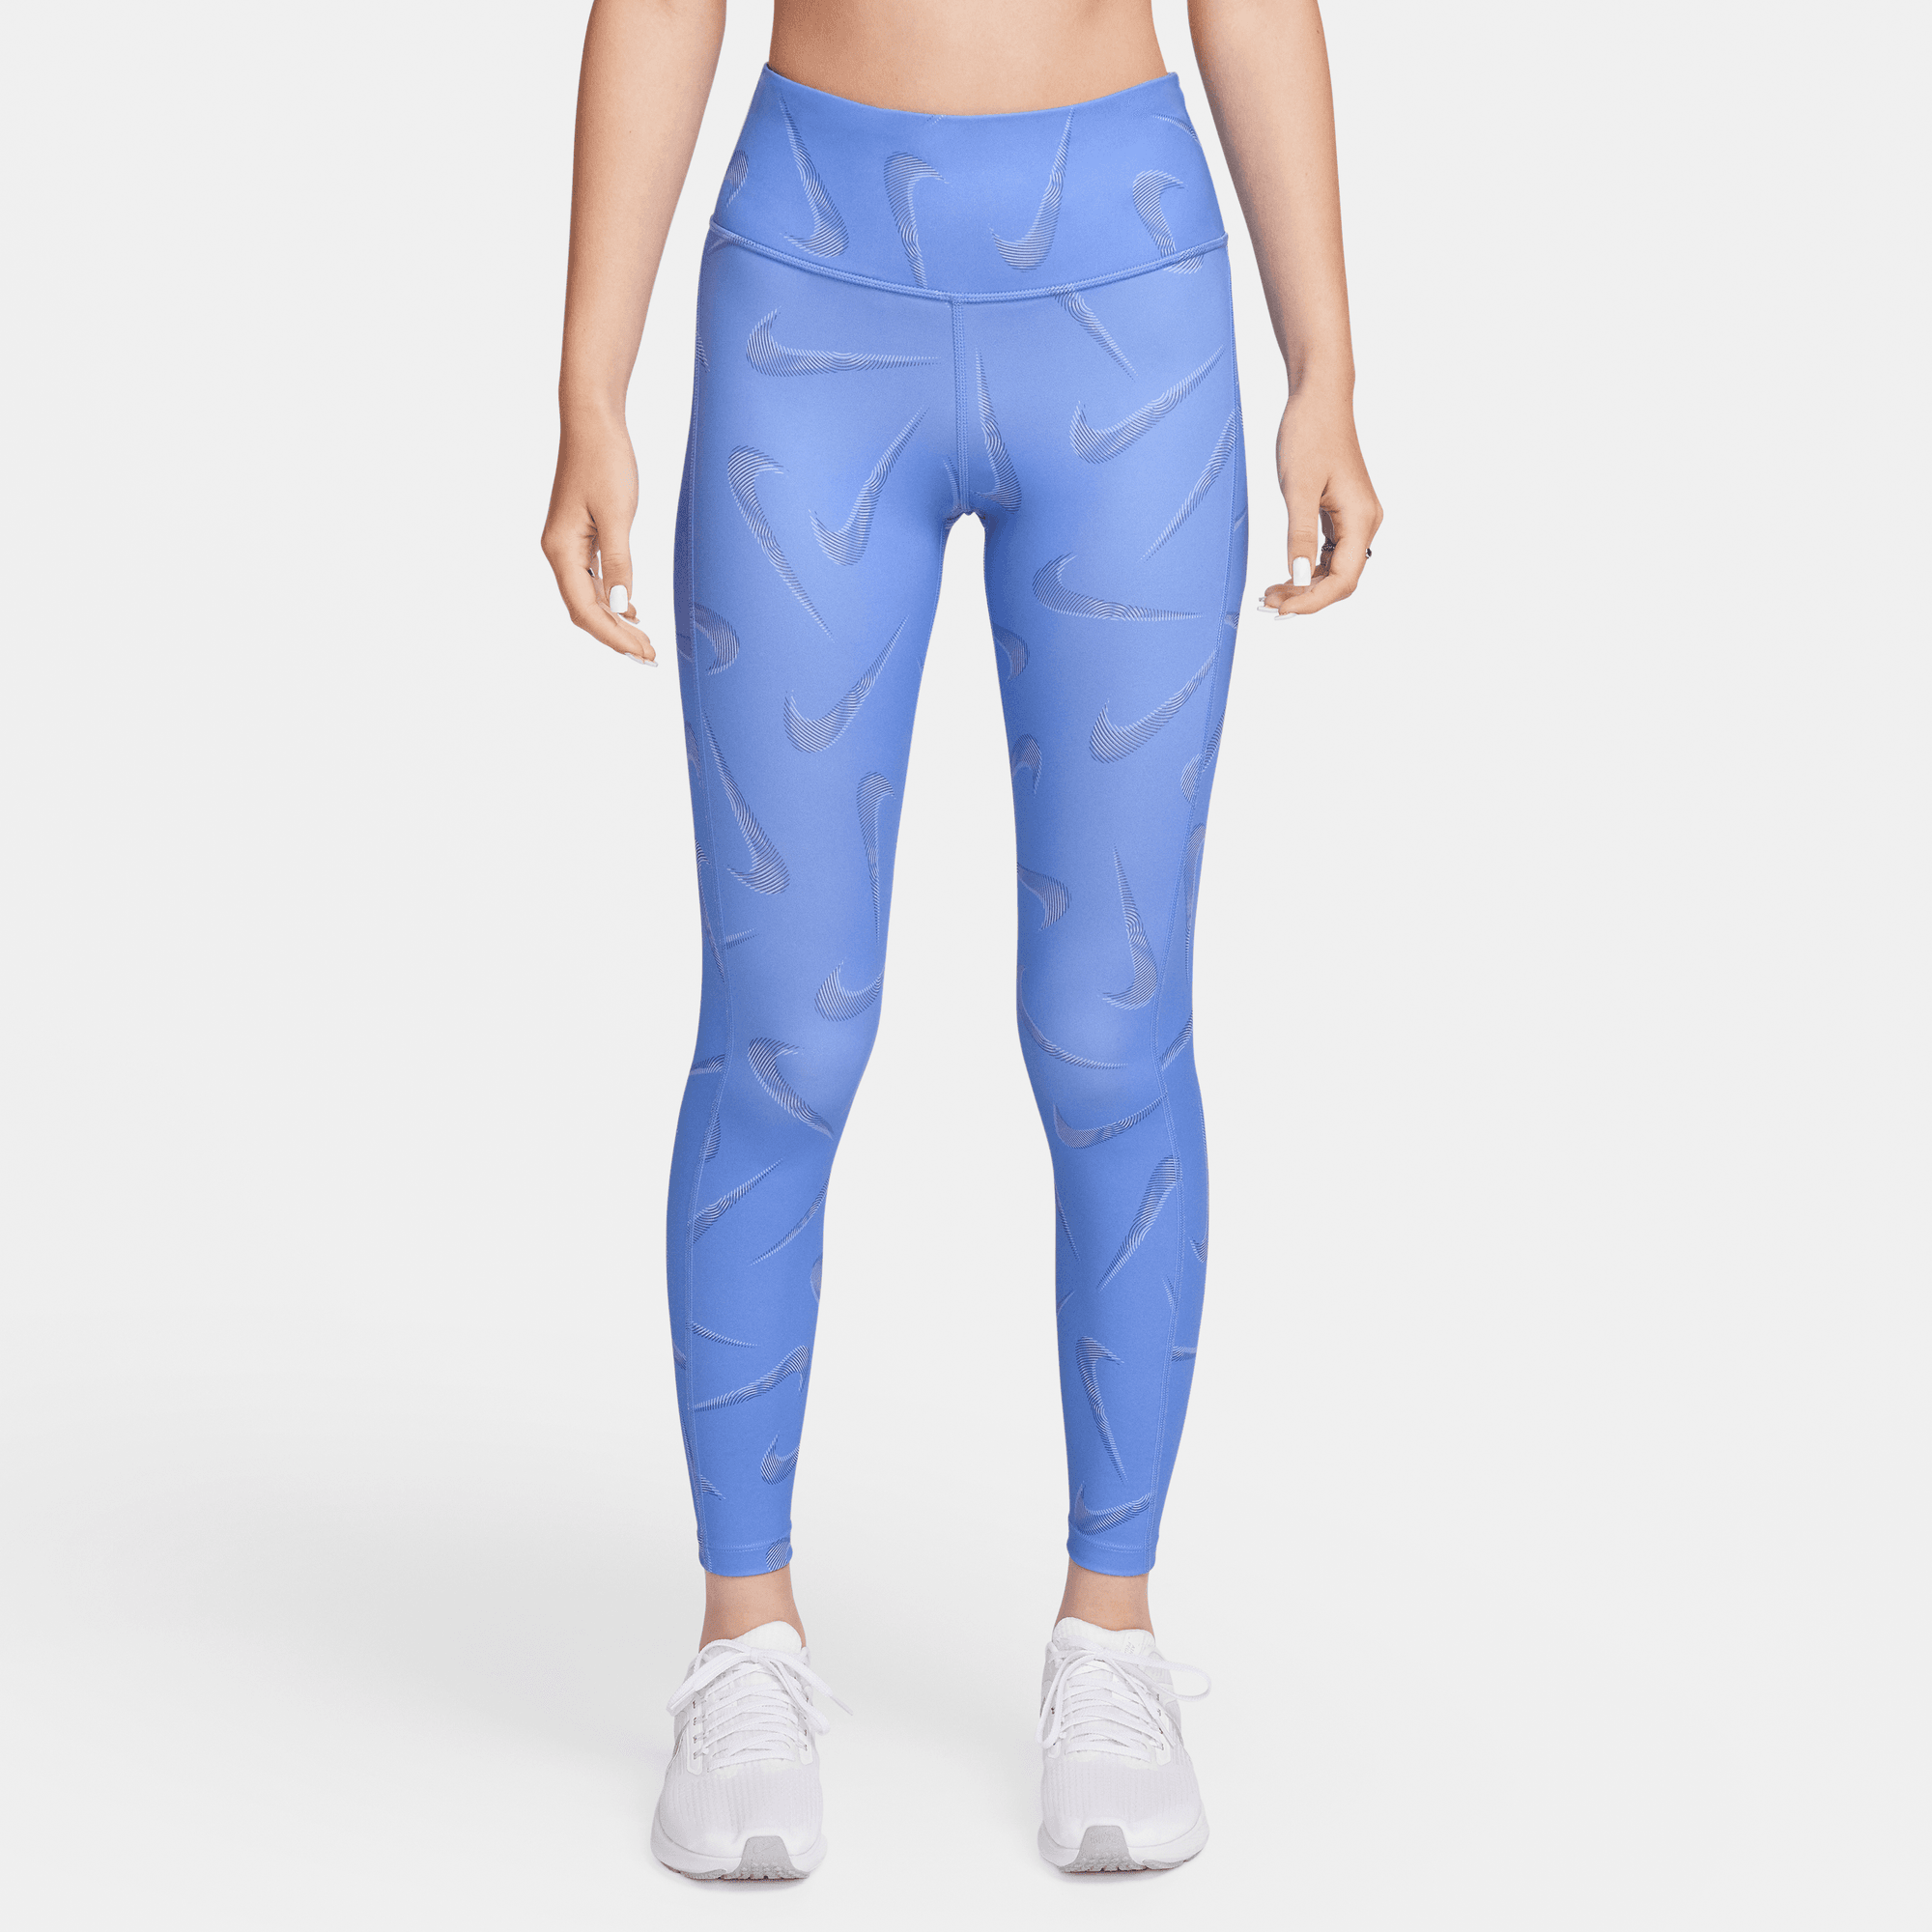 NIKE FAST SWOOSH WOMEN'S MID-RISE 7/8 PRINTED RUNNING LEGGINGS WITH POCKETS